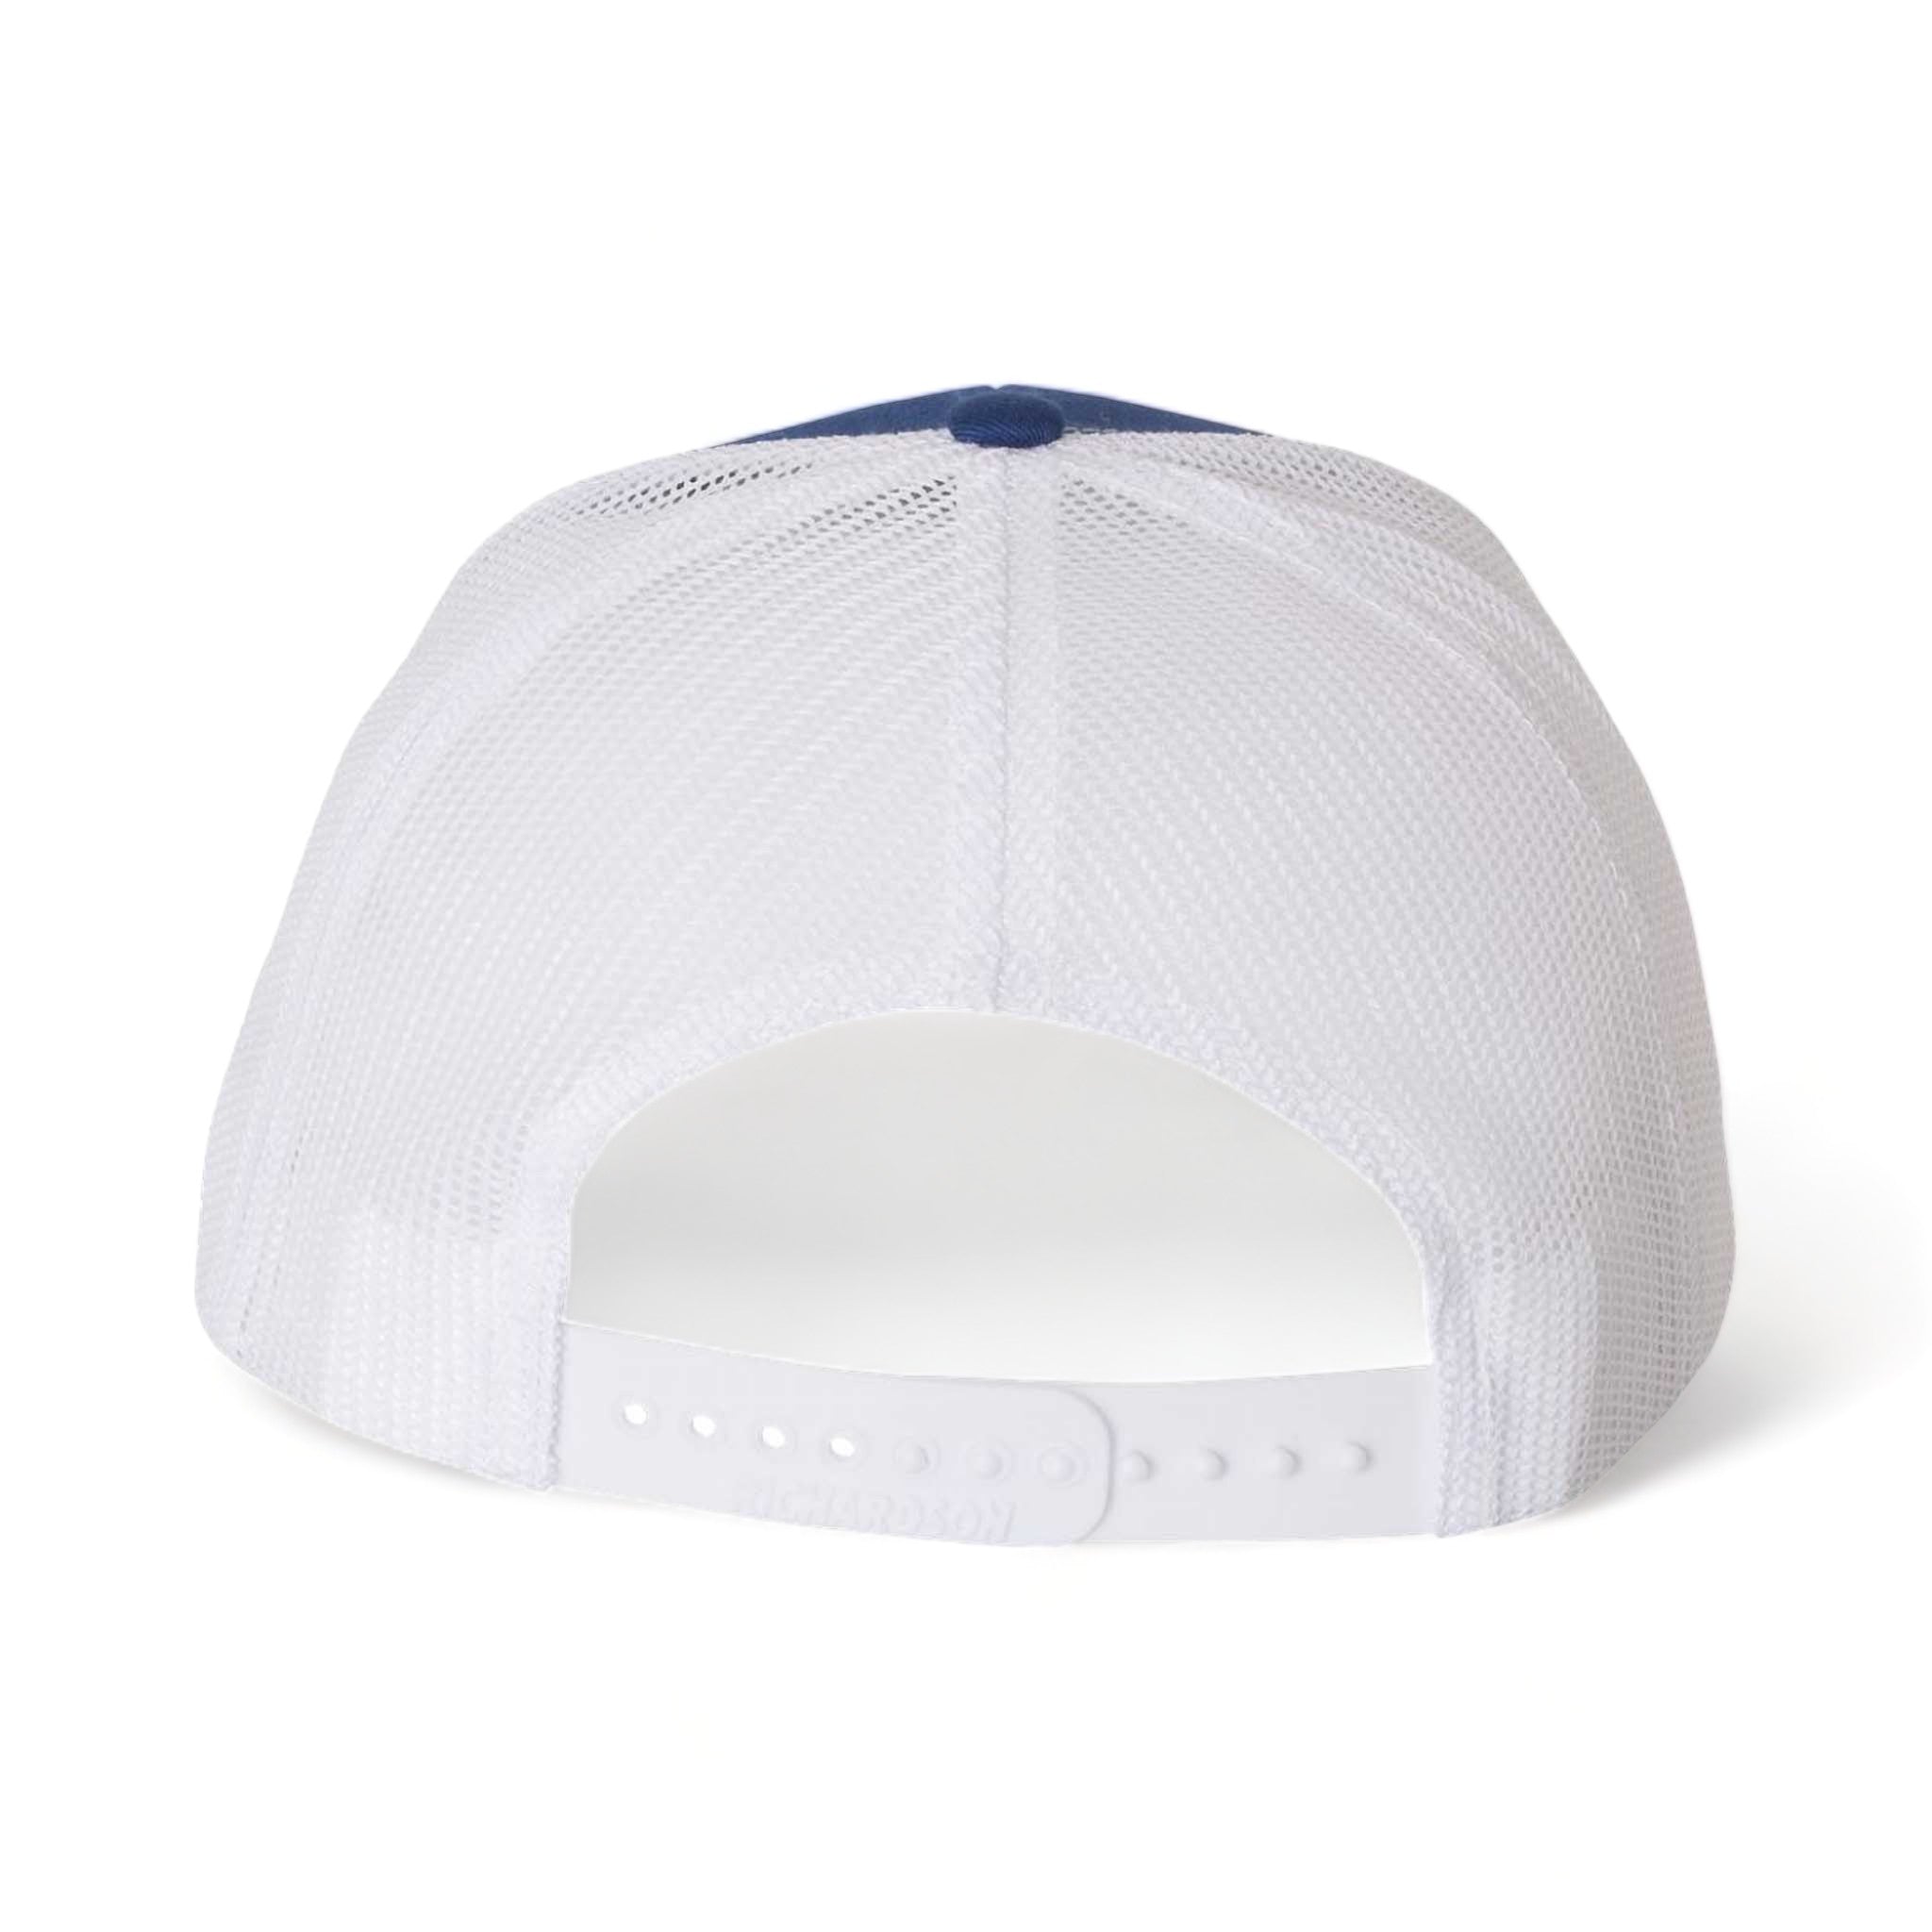 Back view of Richardson 112 custom hat in royal and white